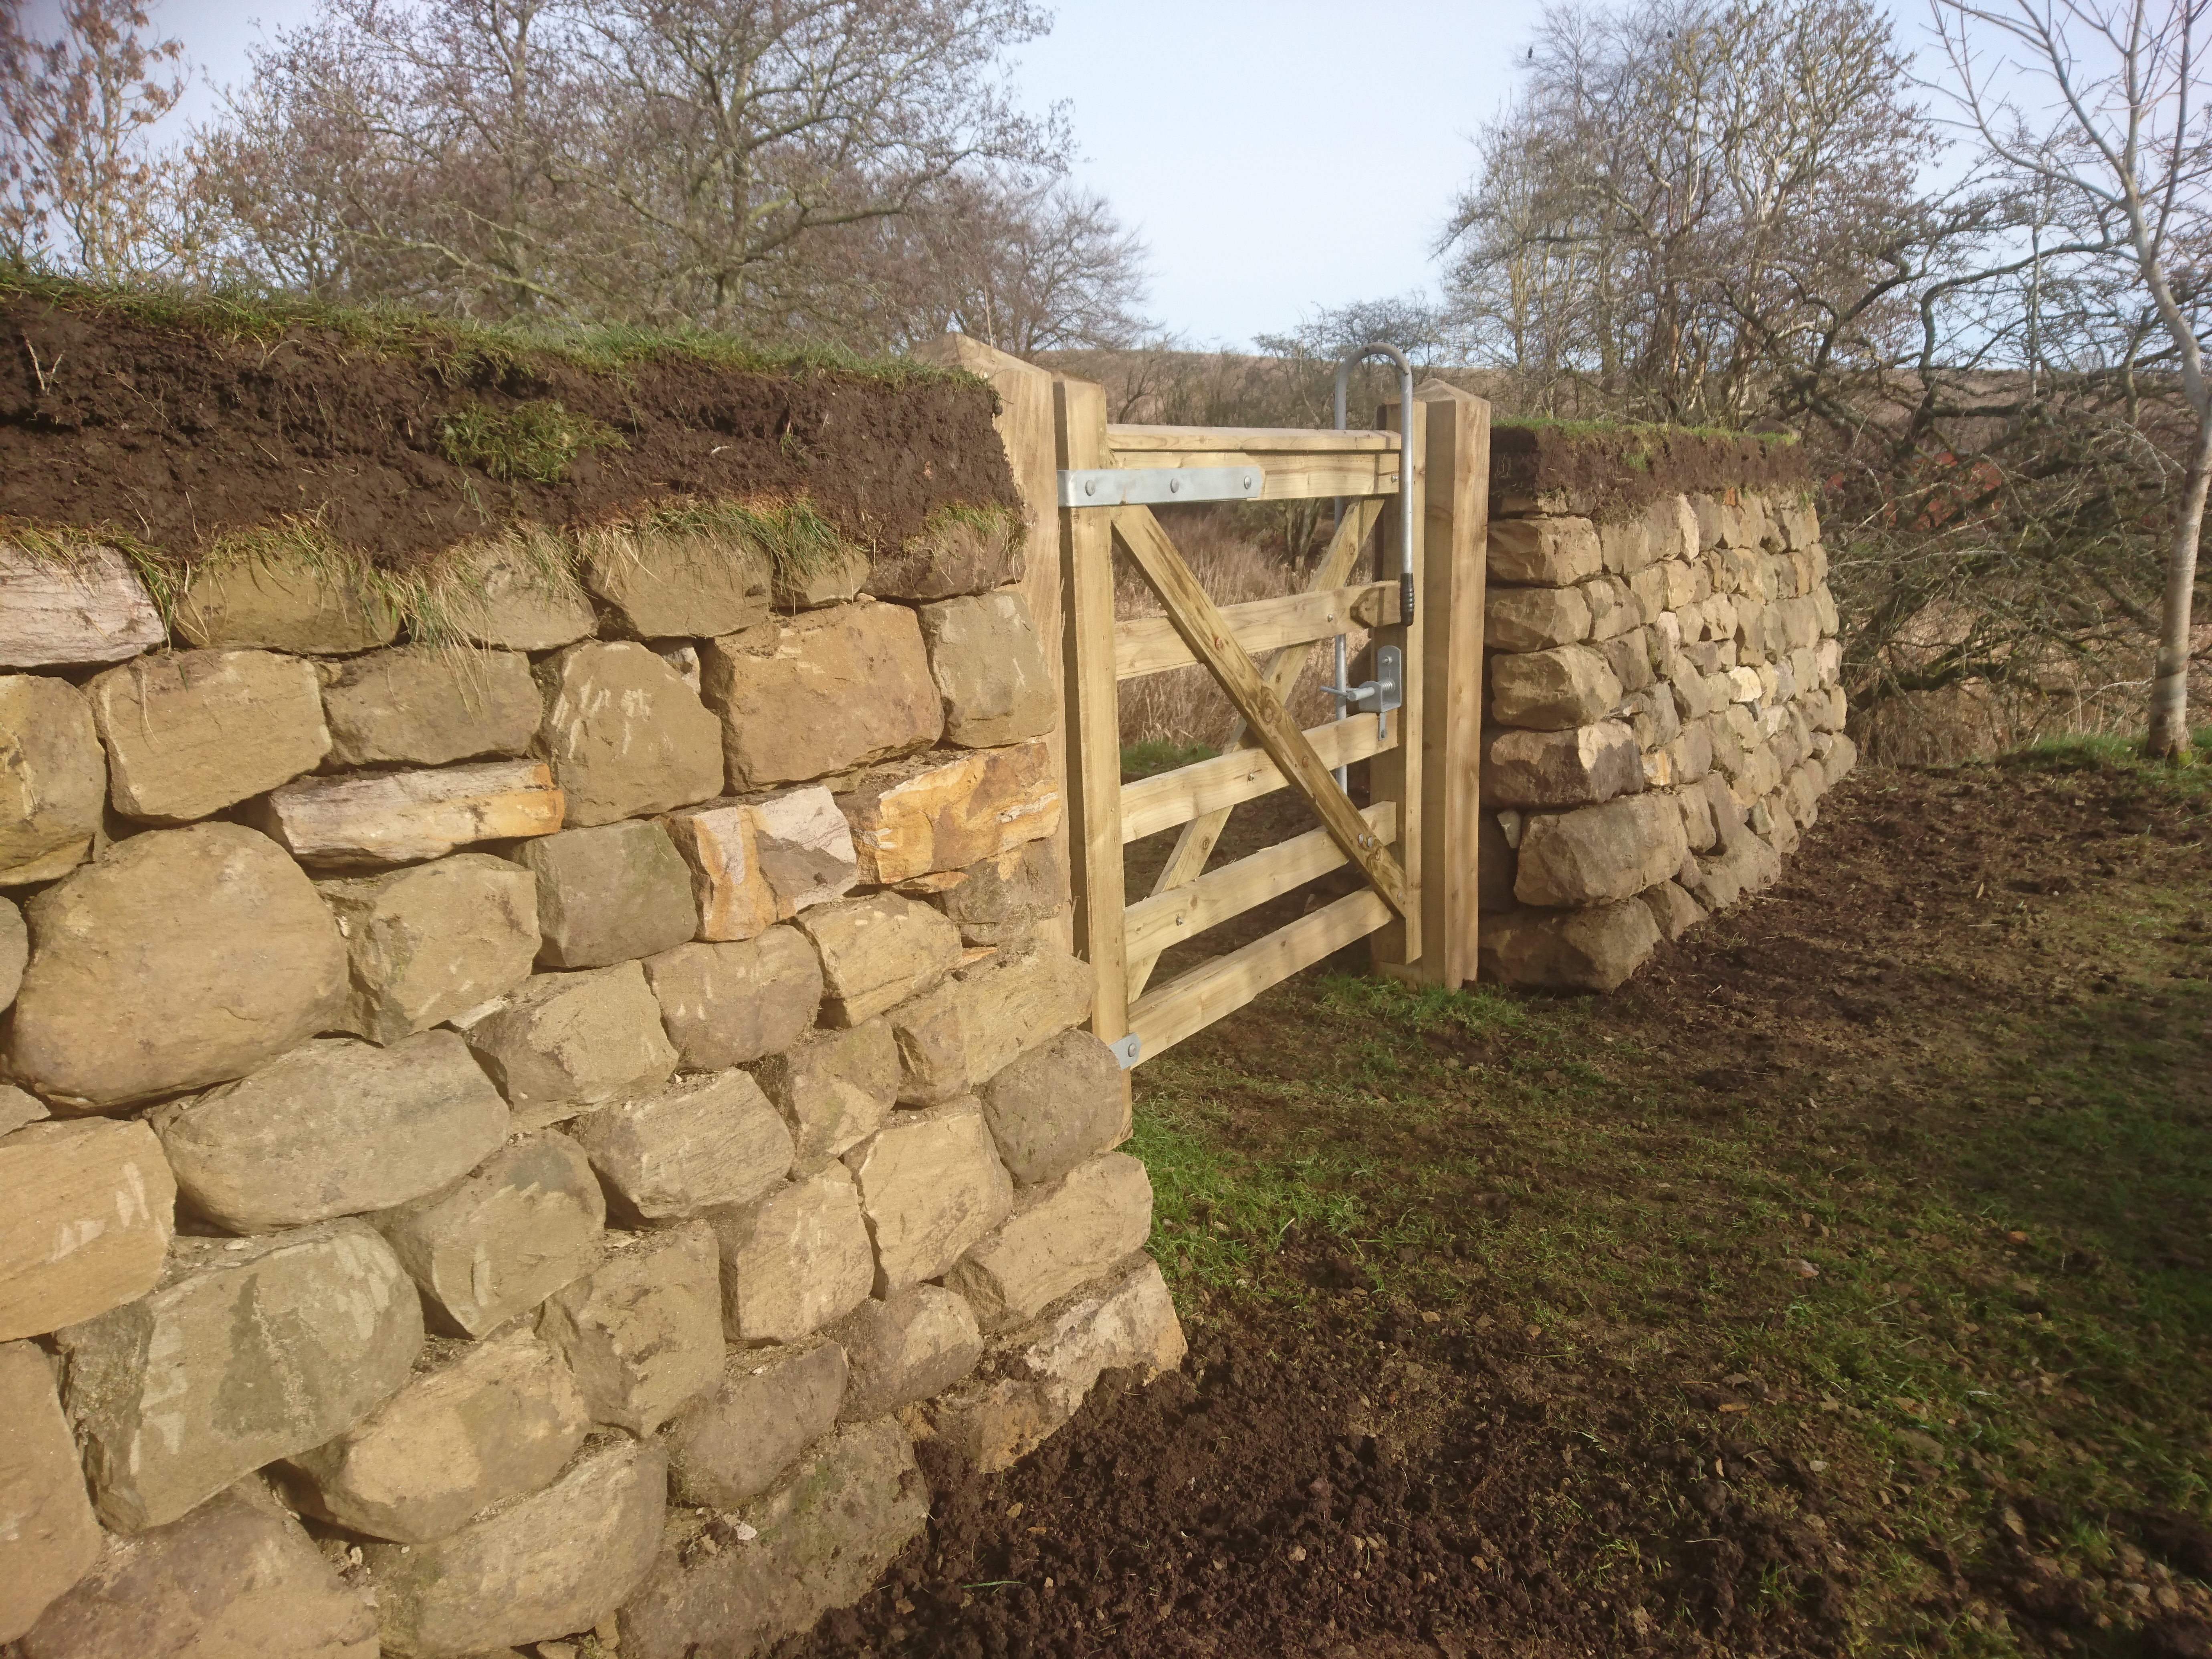 Free-standing dry stone walls